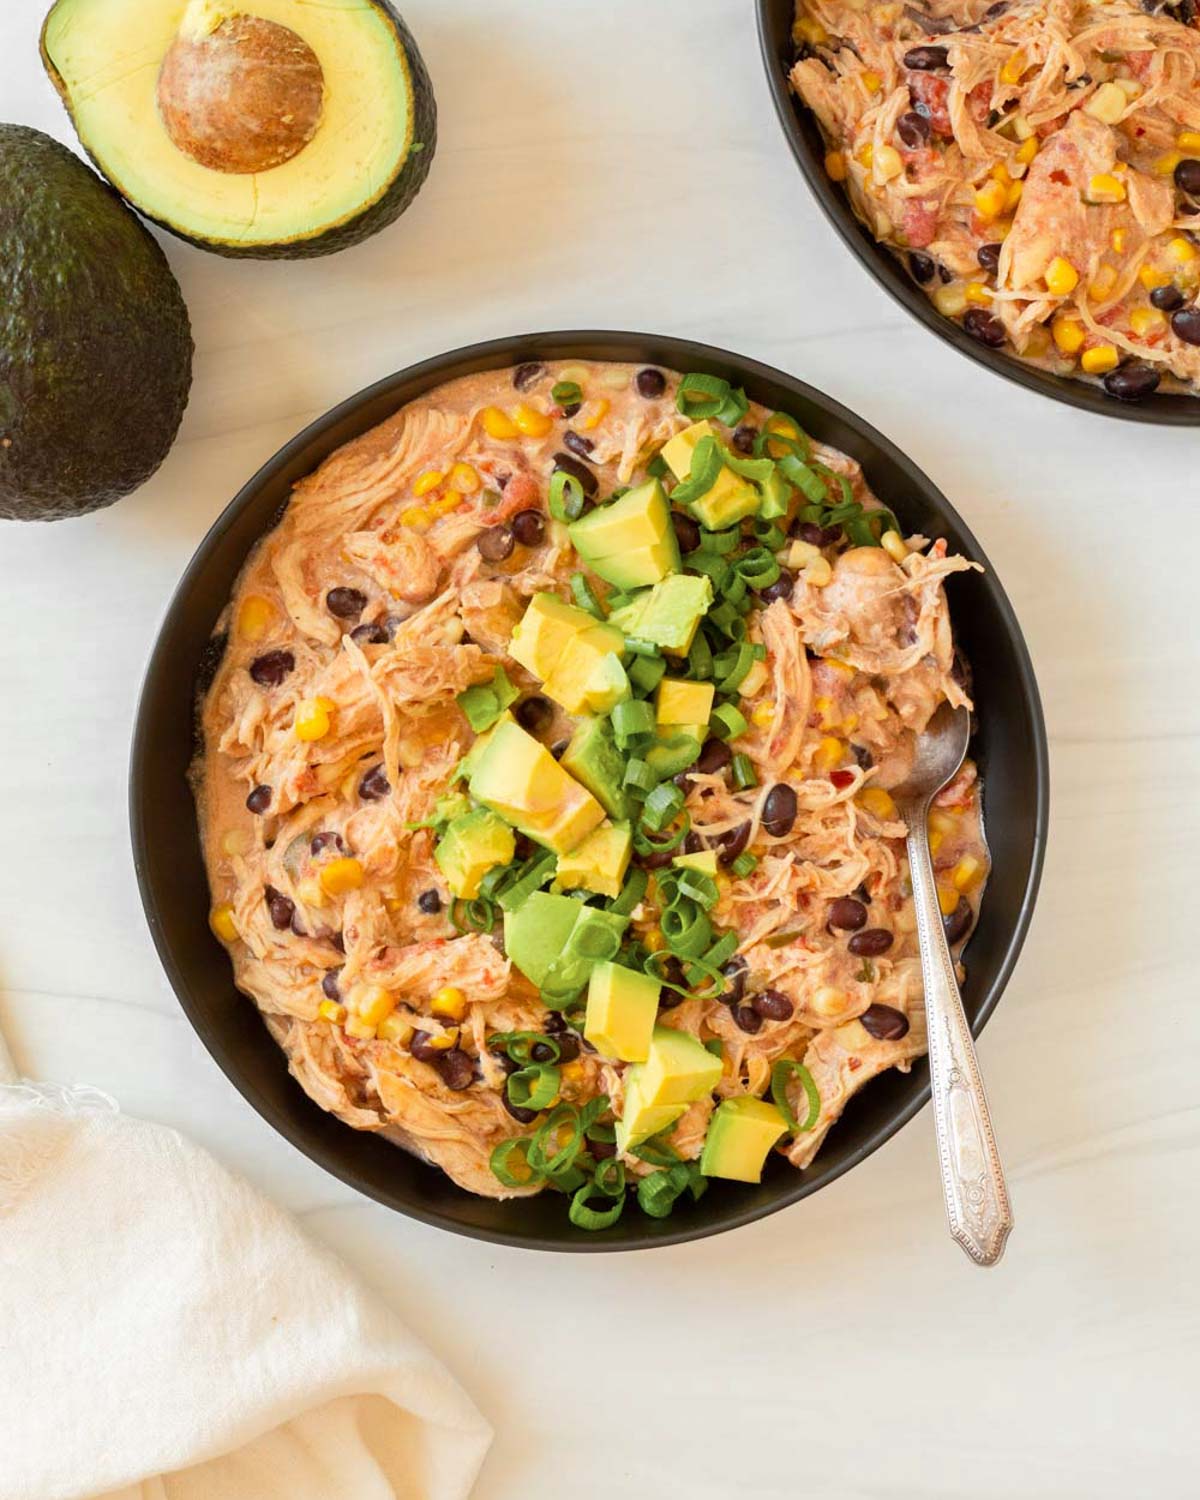 This crockpot cream cheese chicken chili is an easy dump and go crockpot recipe made with simple ingredients for a flavorful and filling comfort food meal.